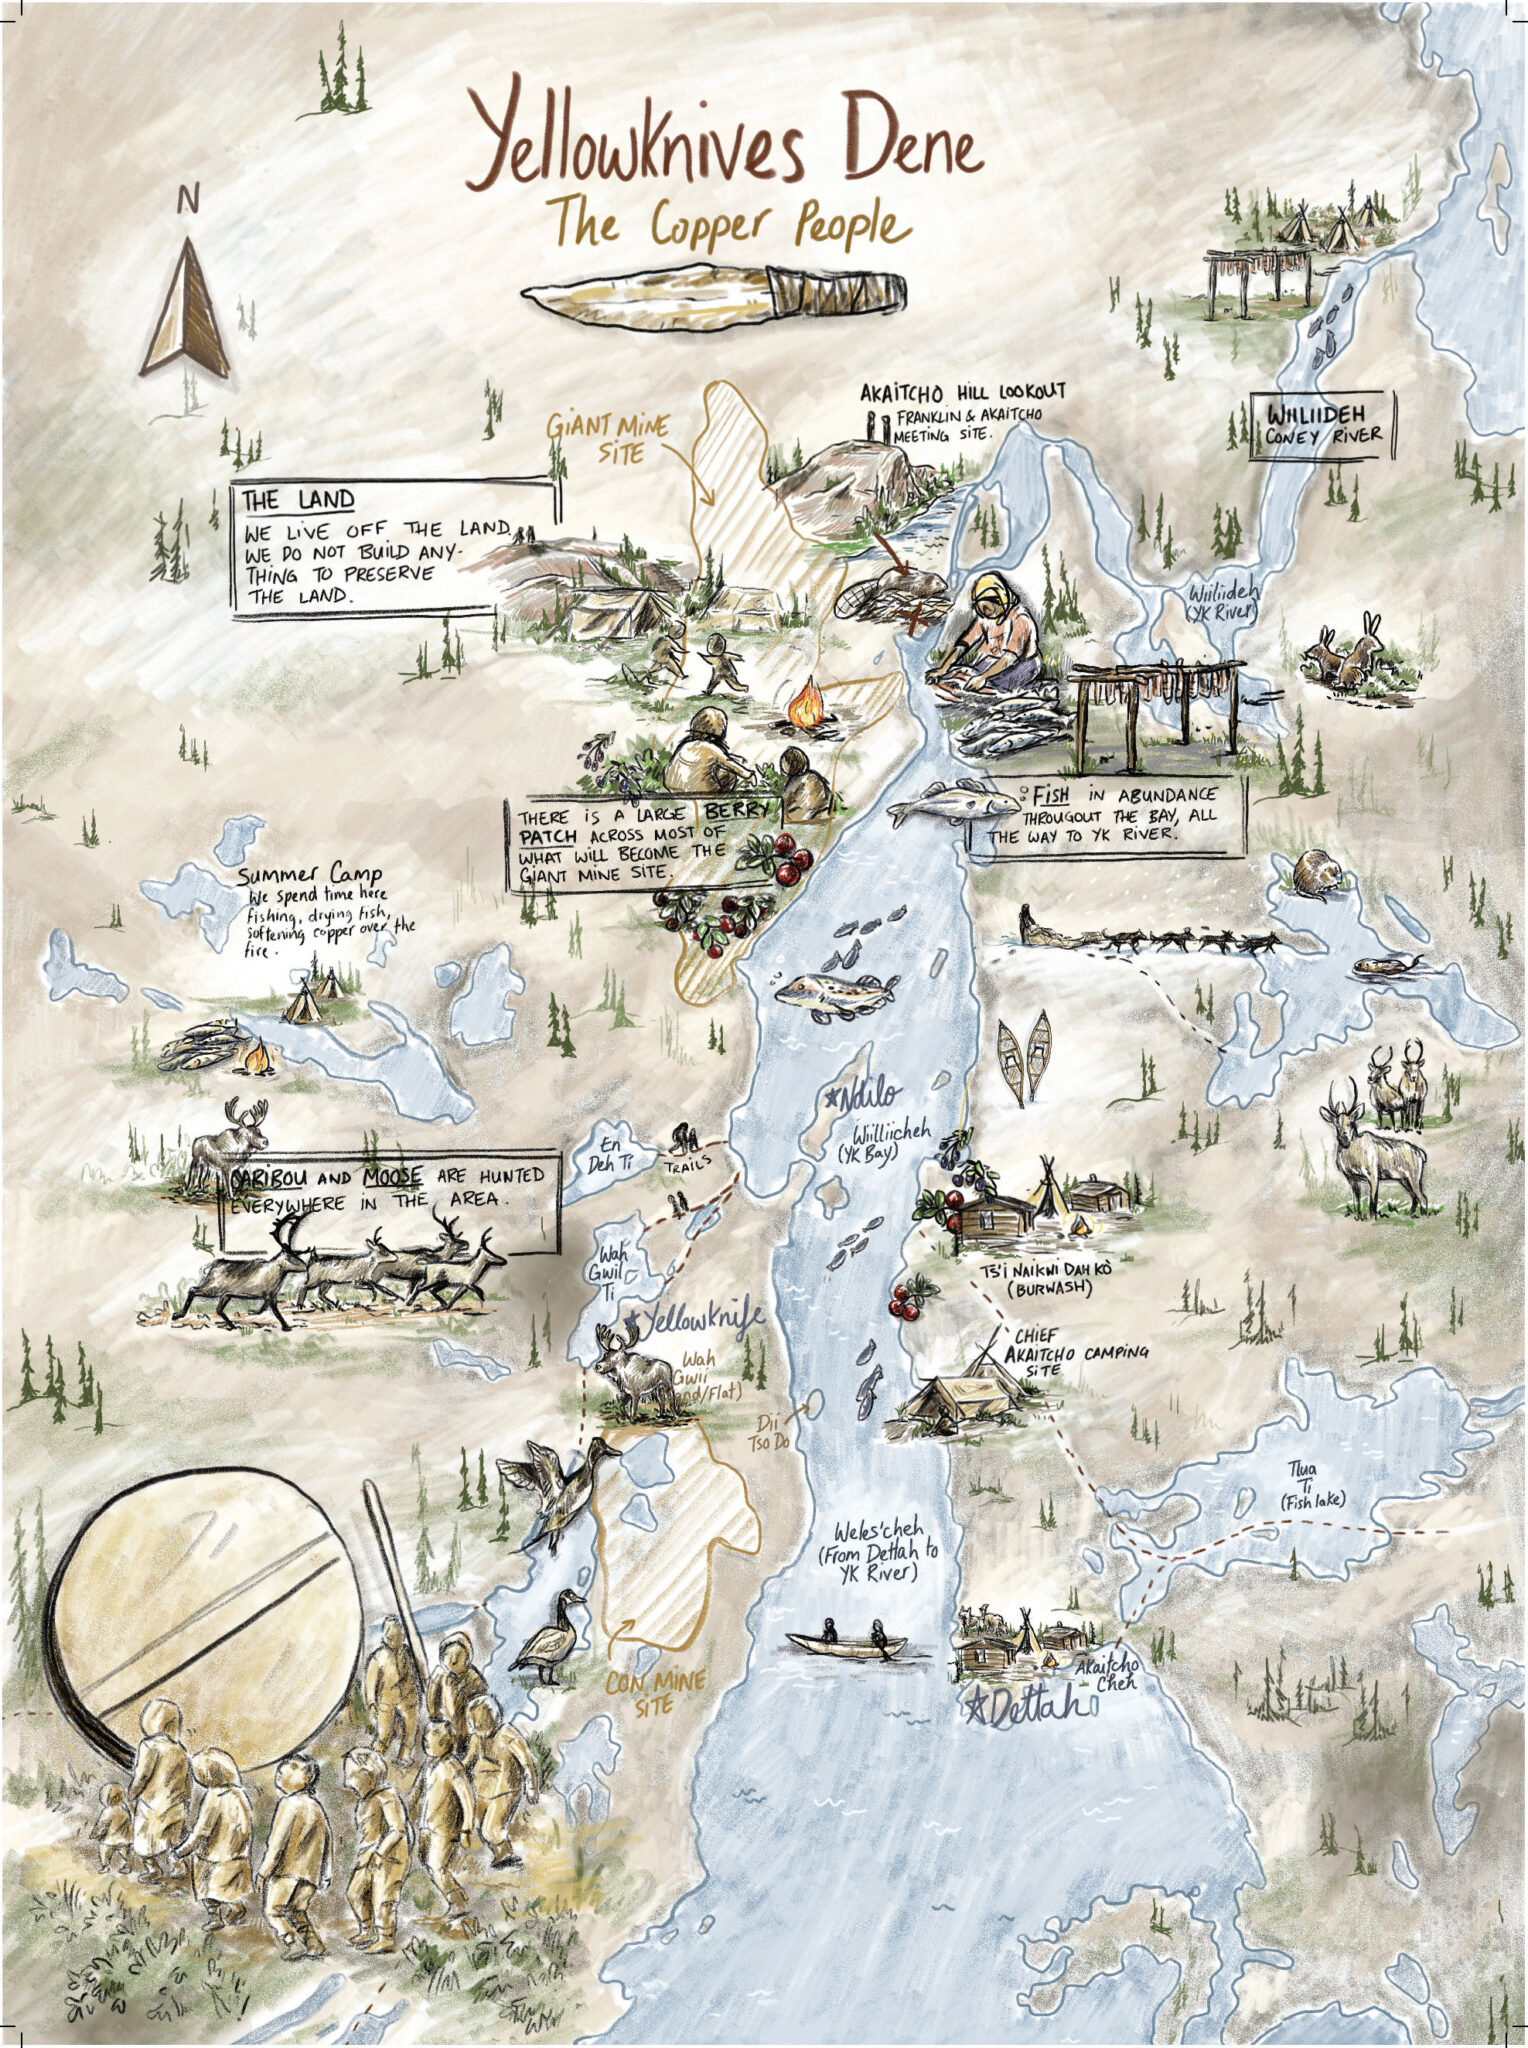 A historical map of the greater Yellowknife area with traditional hunting and settlement areas